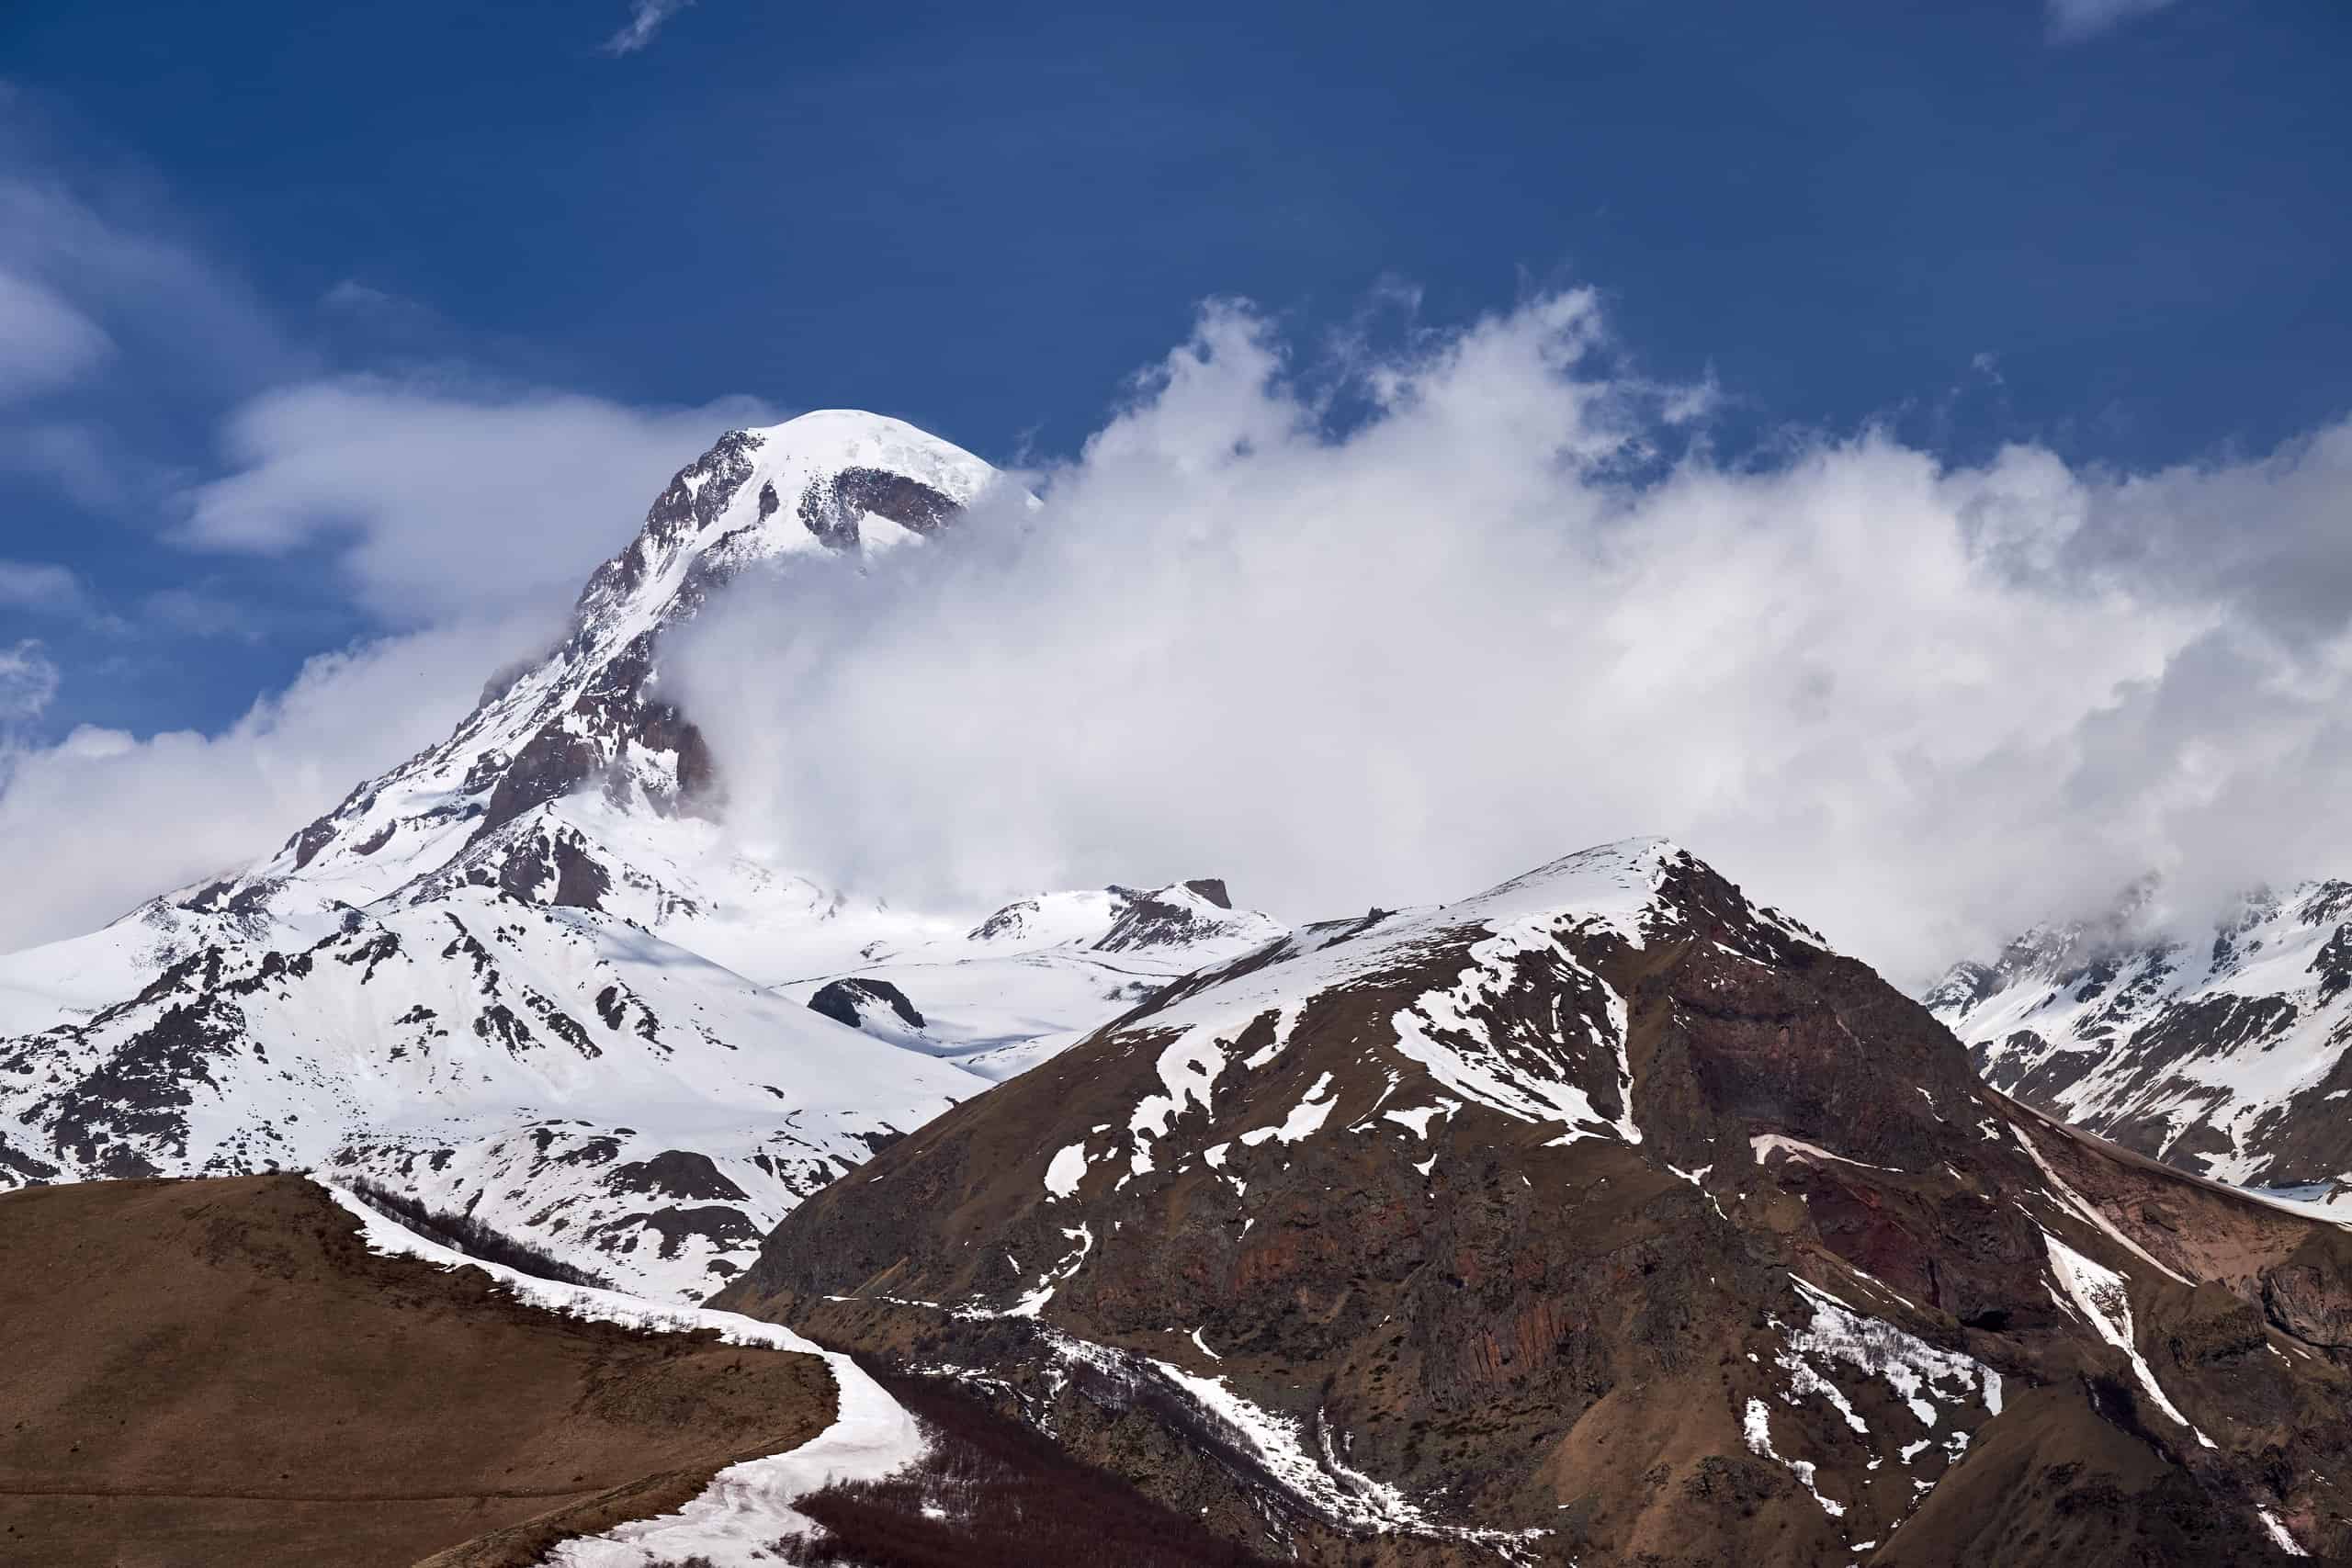 Kazbek Mountain in the clouds